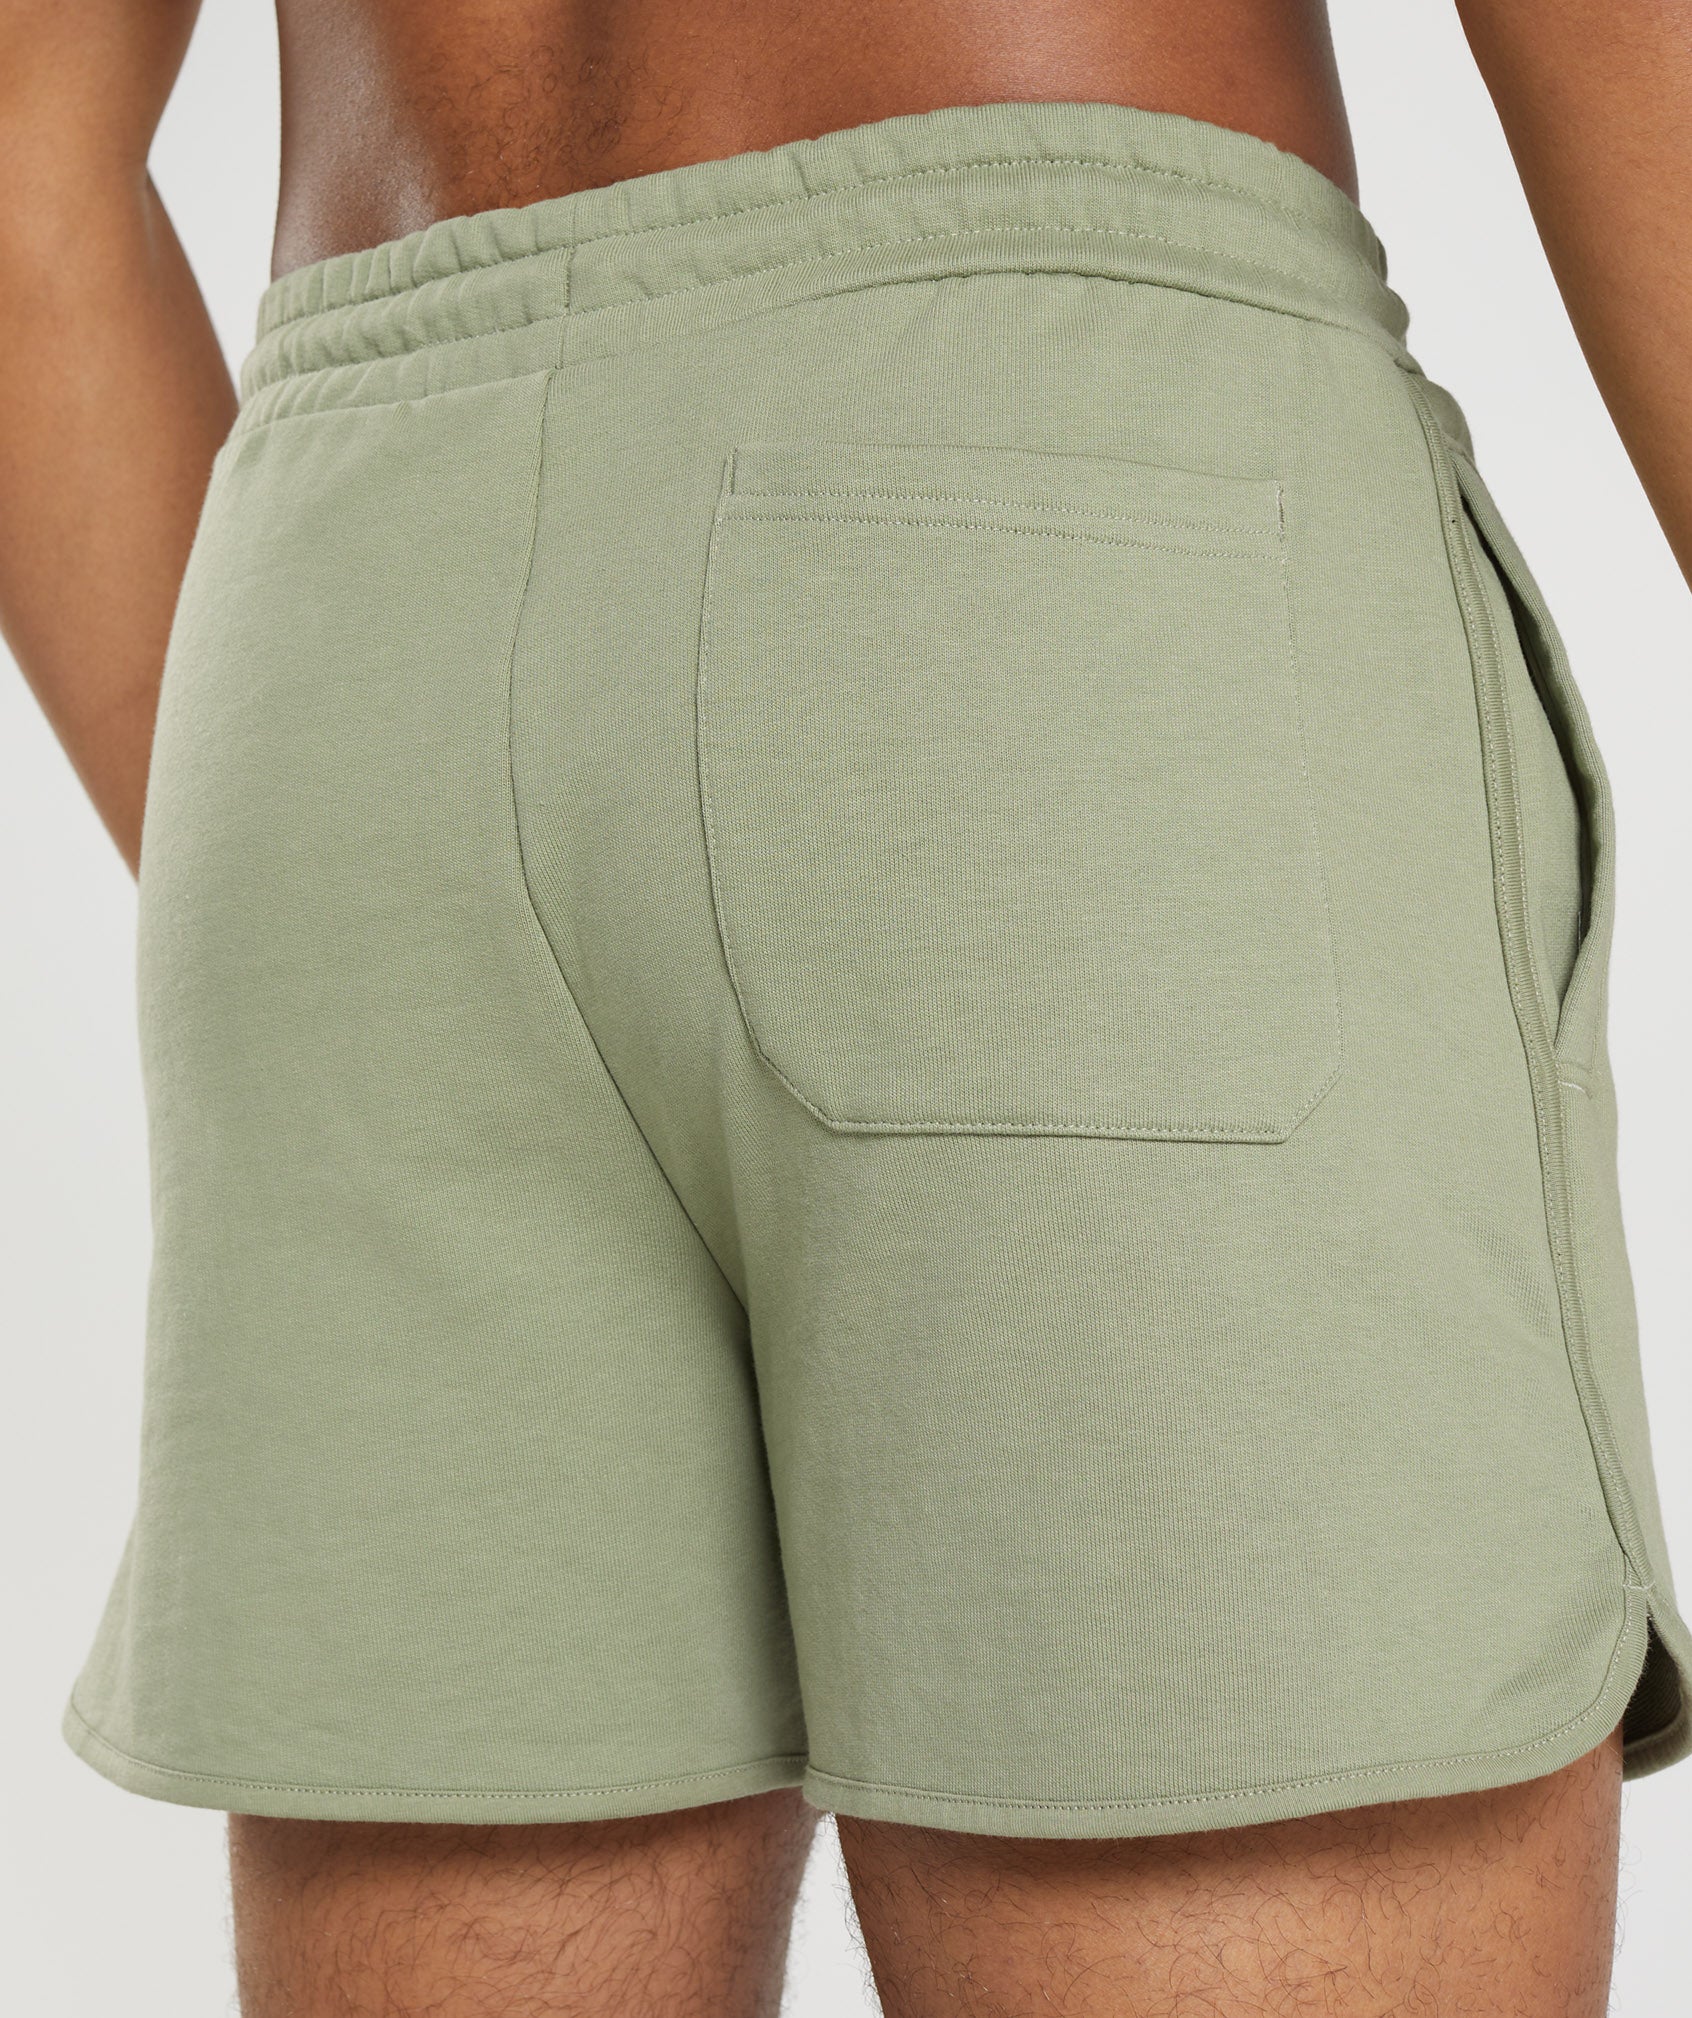 Rest Day Sweats 4'' Lounge Shorts in Sage Green - view 7